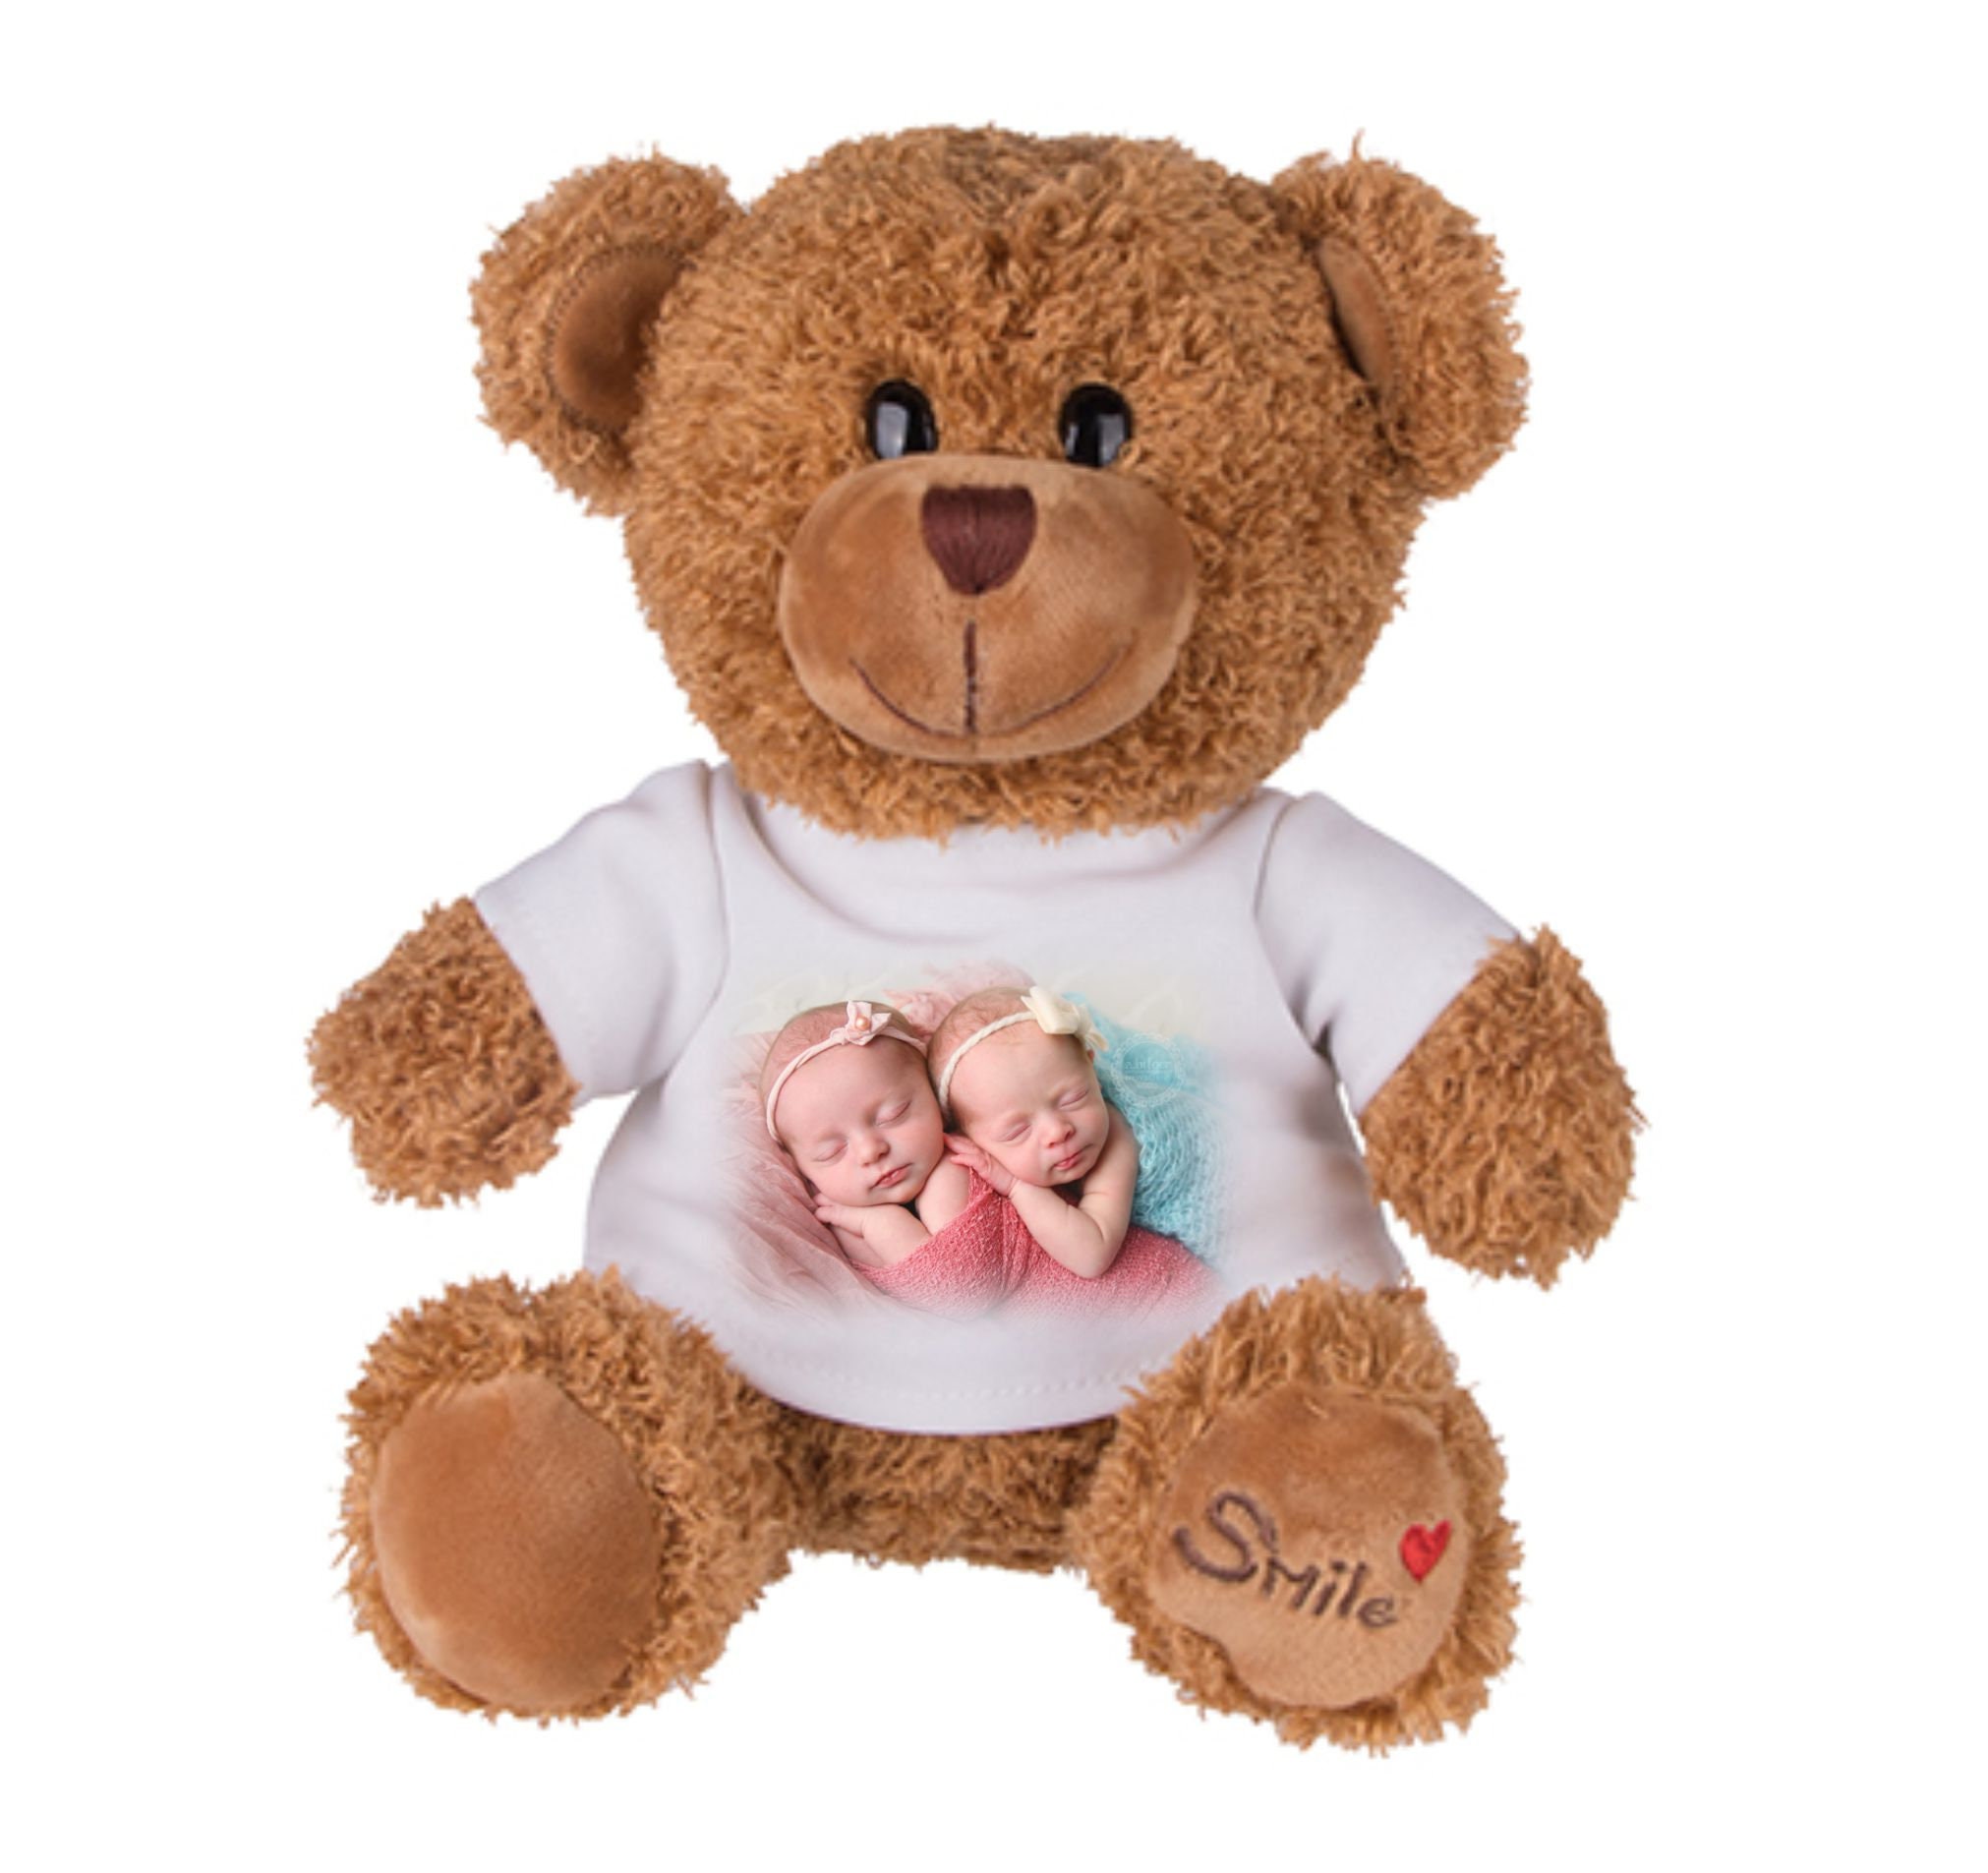 Personalised Teddy Bear T-Shirt To Fit A Special Teddy Own Image & Text  Printable on Both Sides Any Occasion - Etsy Italia